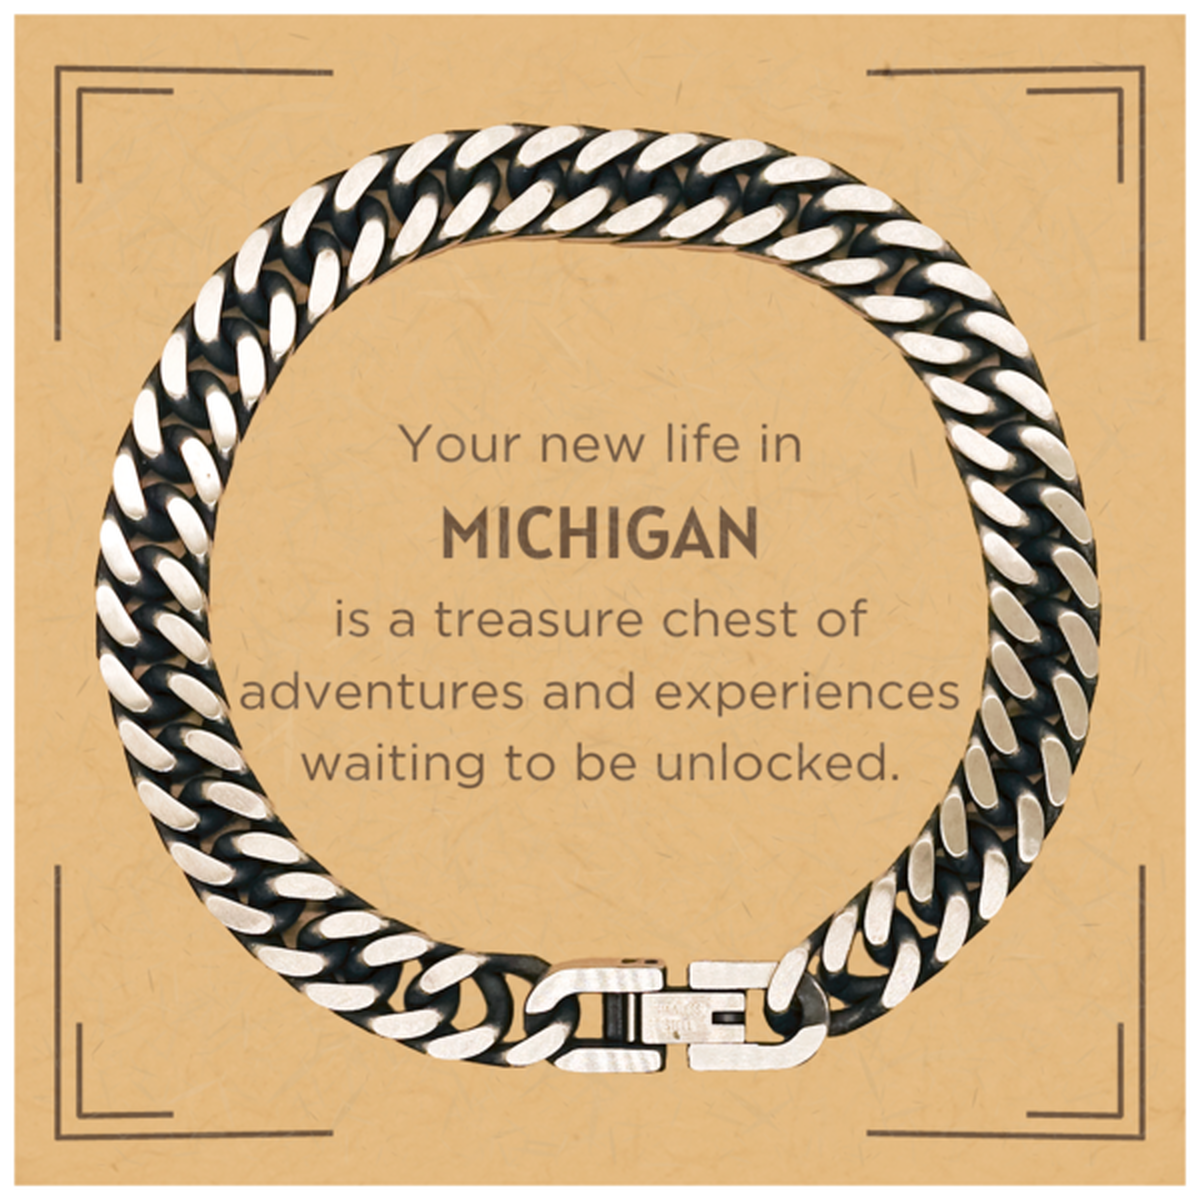 Moving to Michigan Gifts, Your new life in Michigan, Long Distance Michigan Christmas Cuban Link Chain Bracelet For Men, Women, Friends, Coworkers